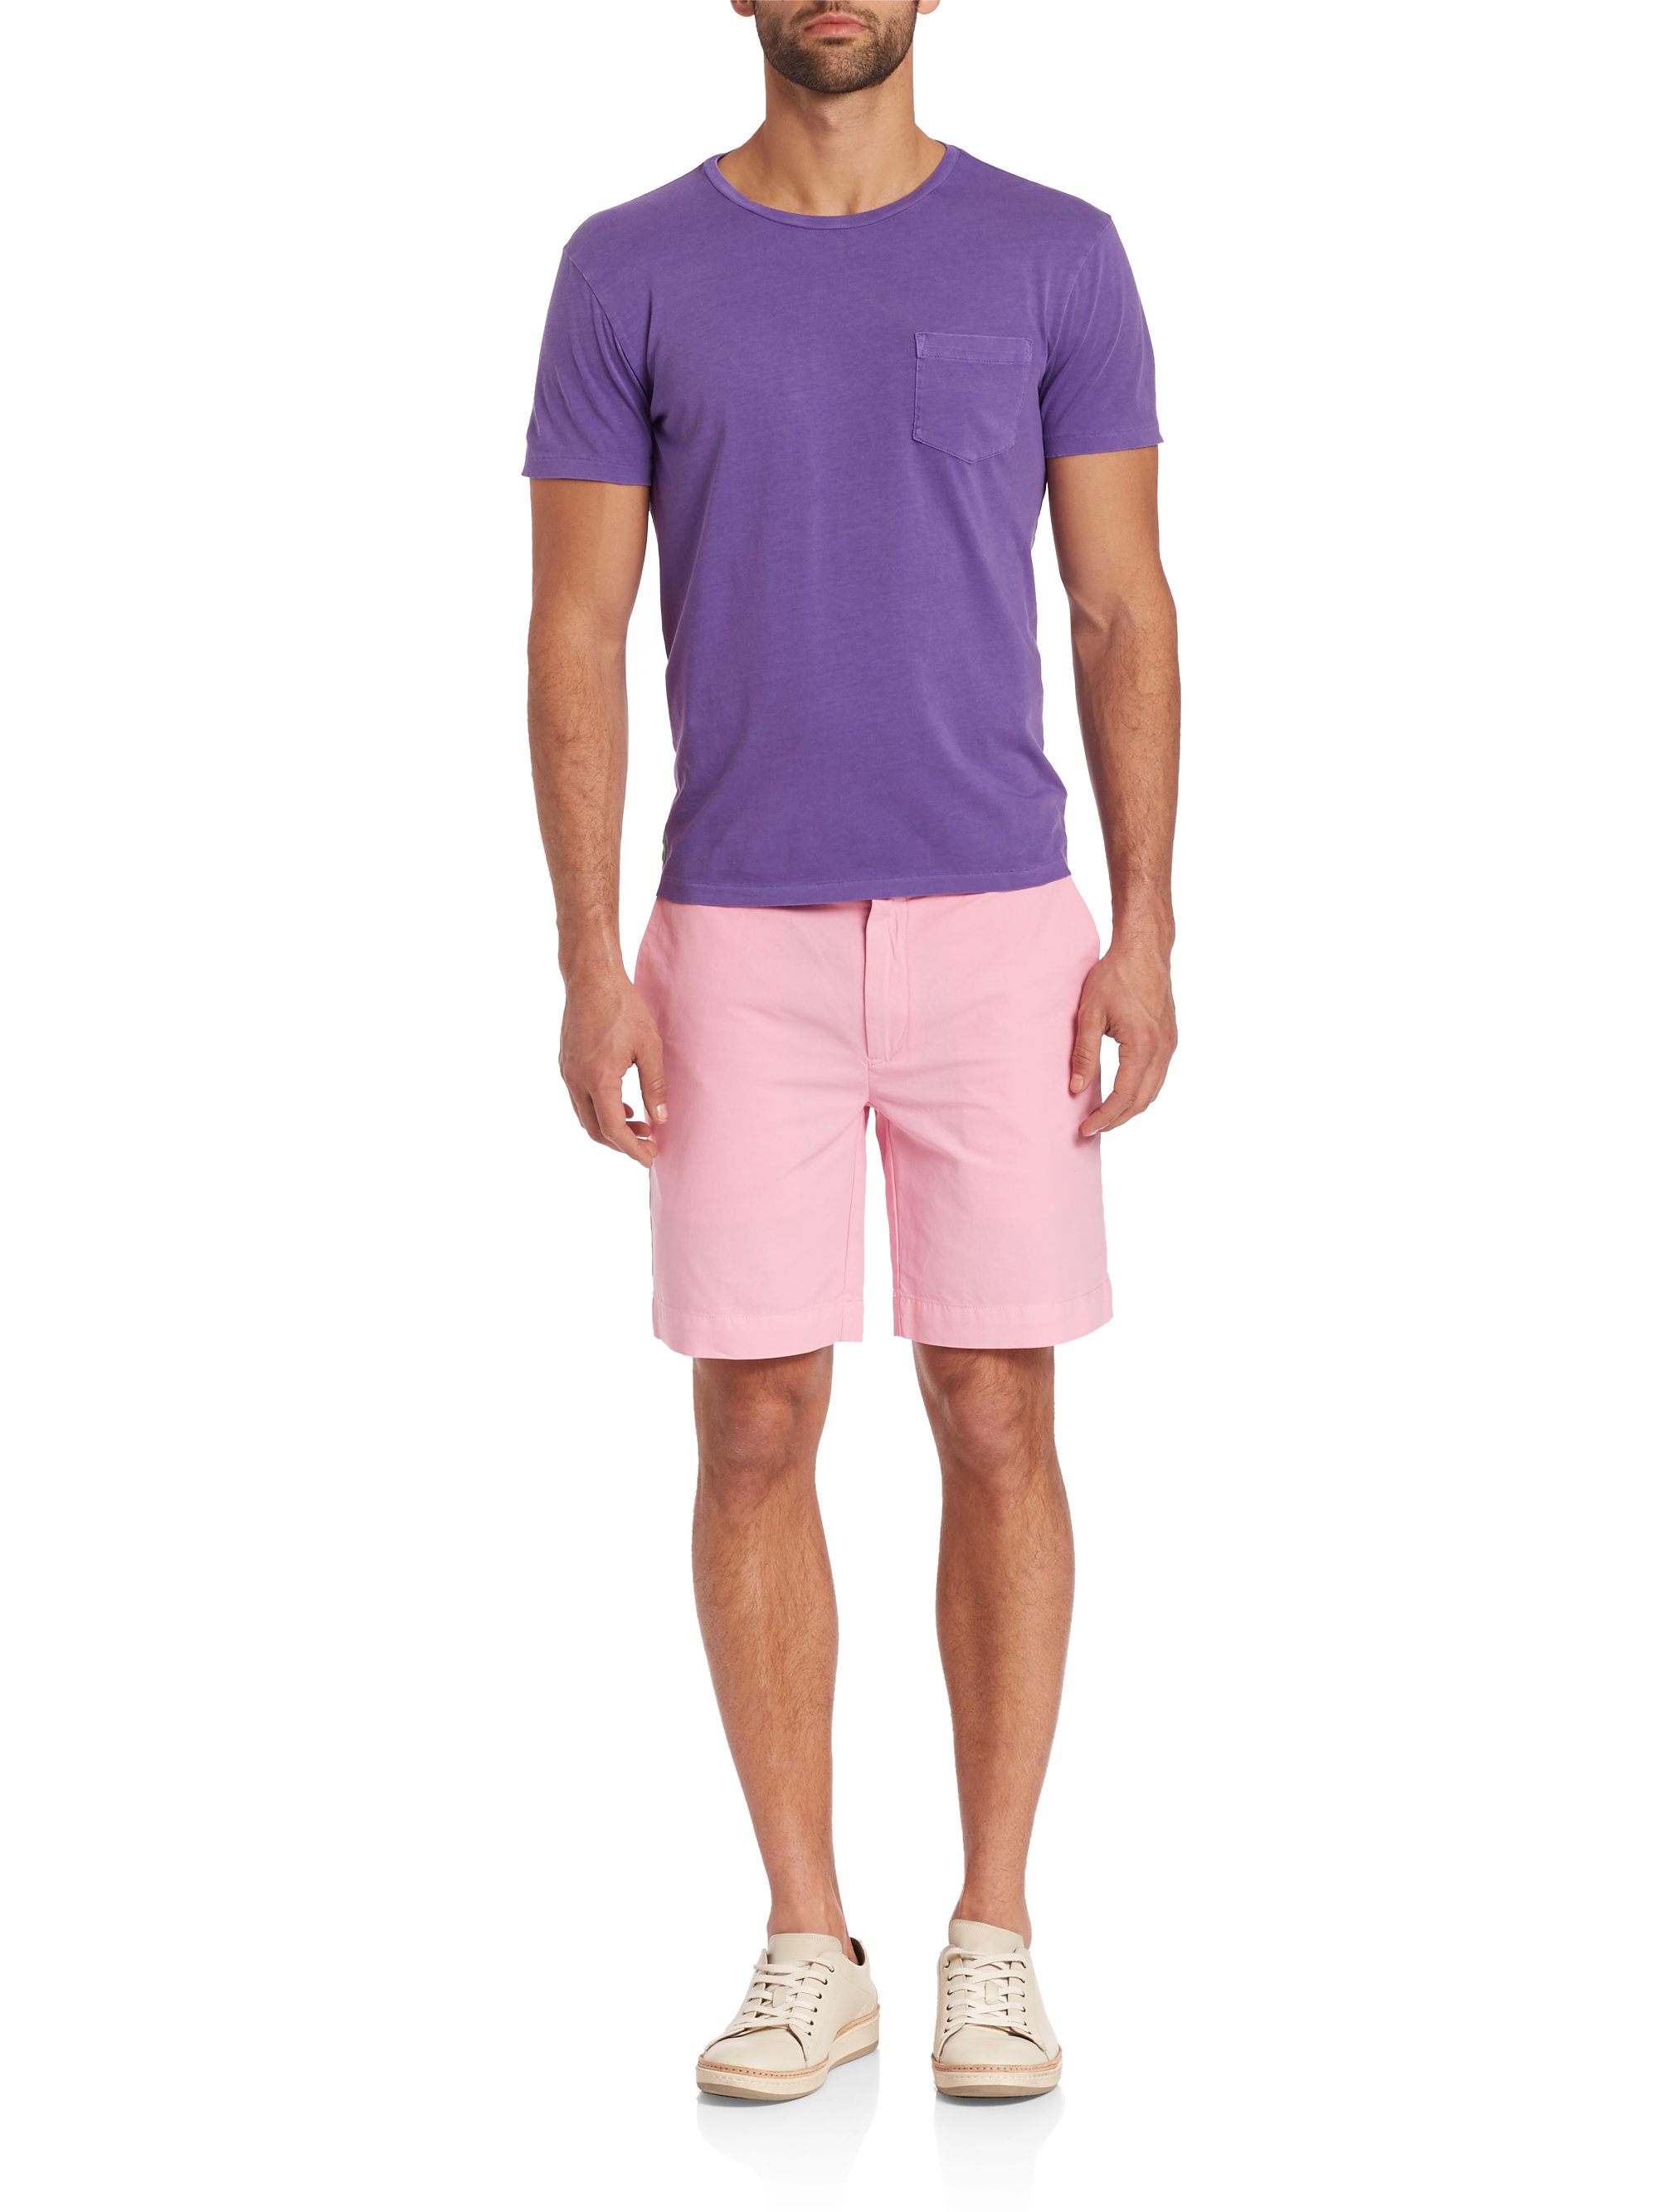 Polo Ralph Lauren Solid Classic-fit Shorts in Pink for Men - Lyst